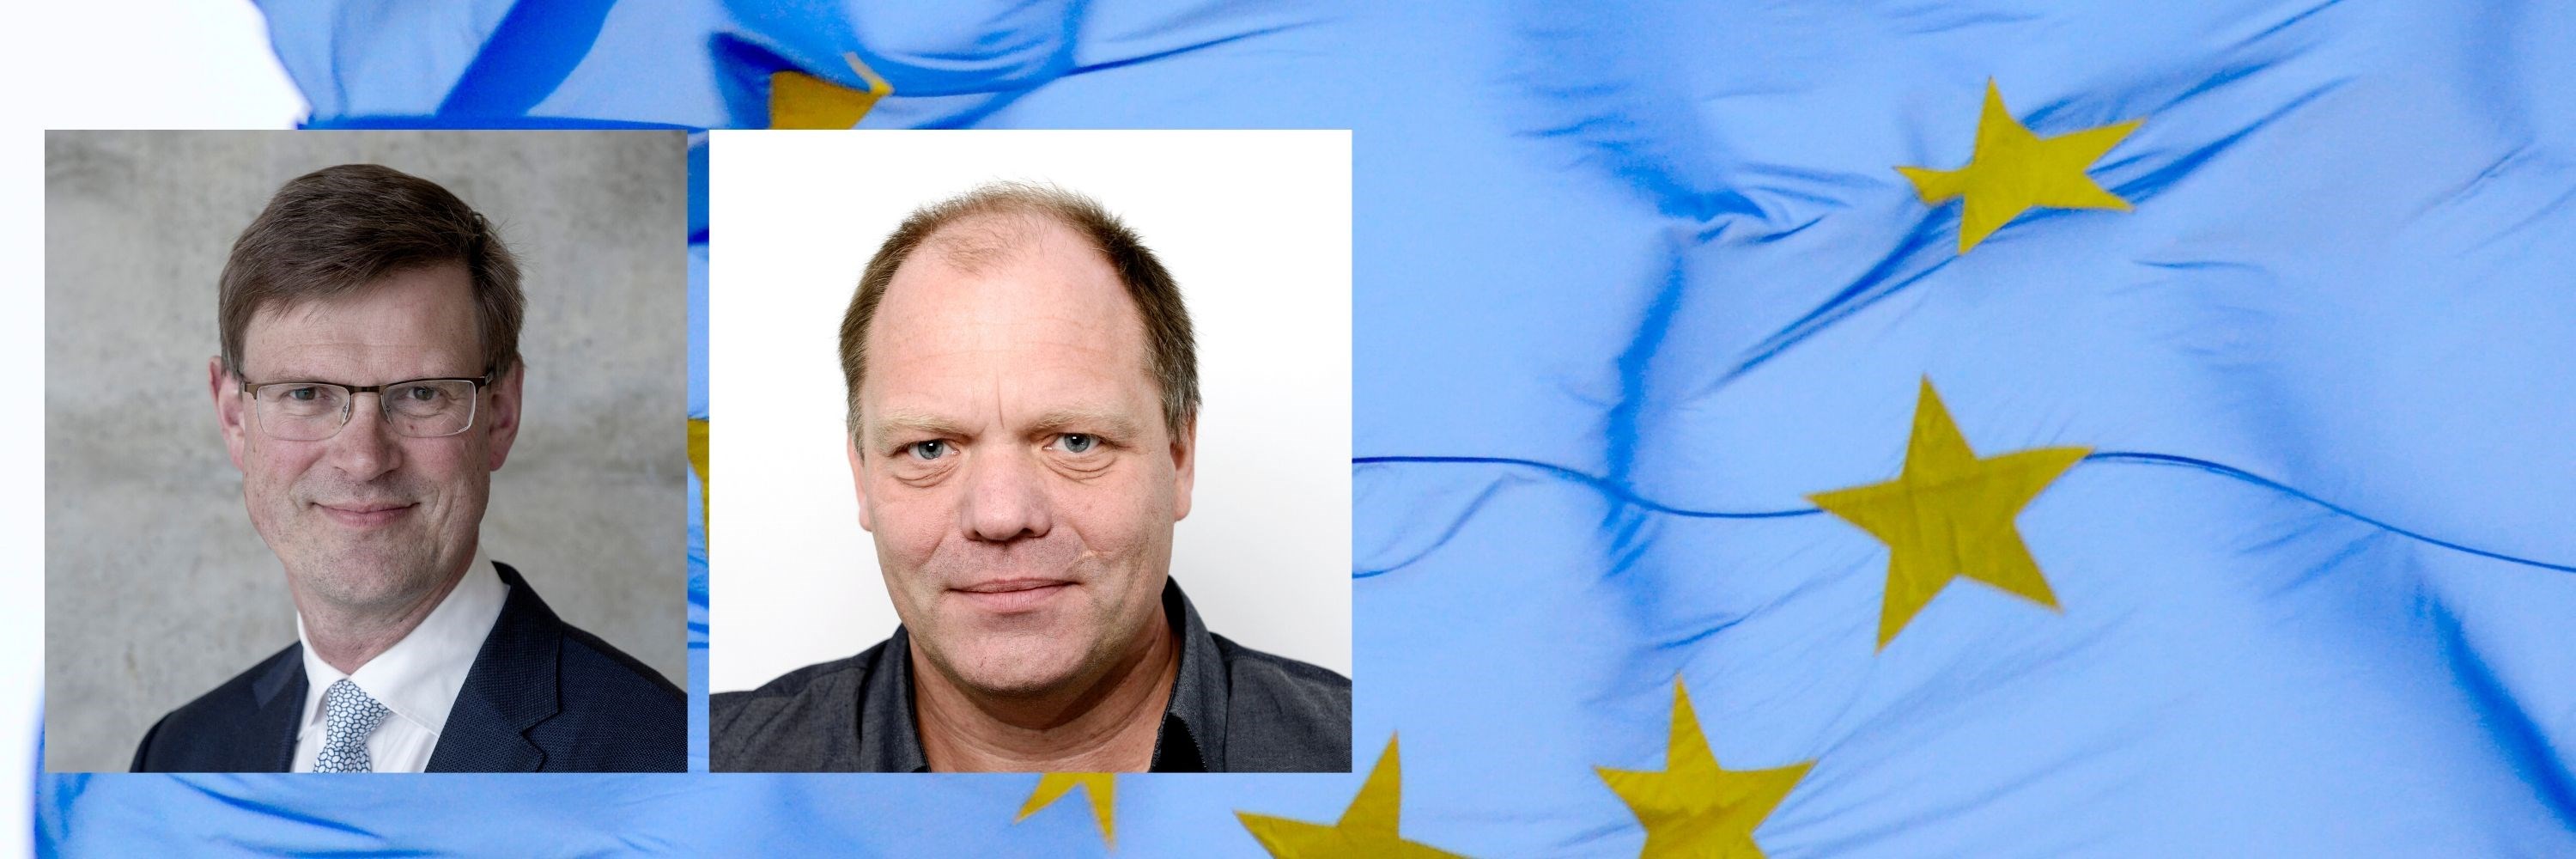 Alexander W. Cappelen and Aksel Mjøs are among the members of the reference groups for the EU's new research and innovation programme Horizon Europe.